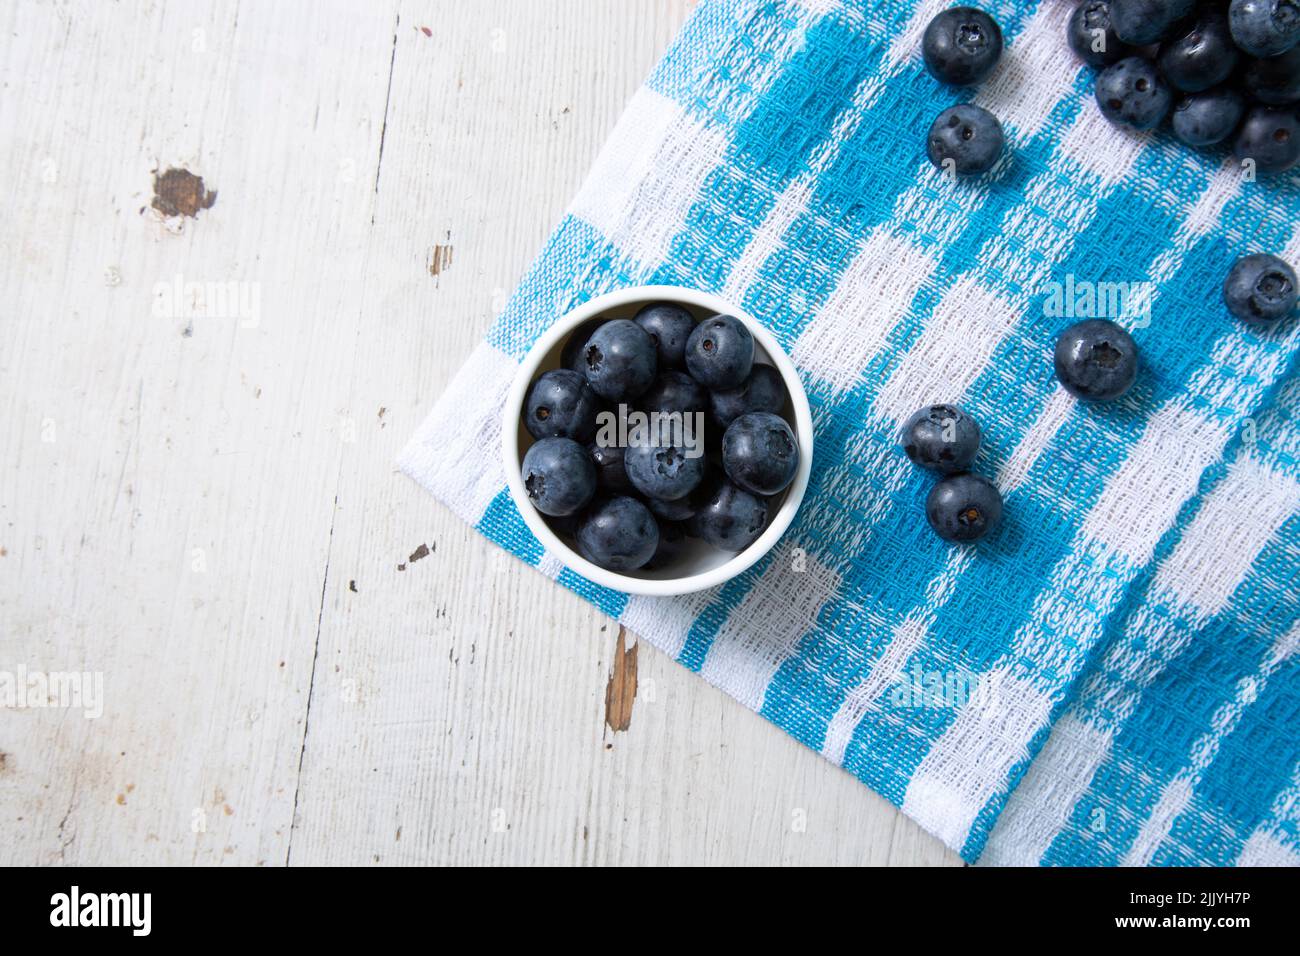 Top view of blueberries in a small bowl on a wooden table Stock Photo